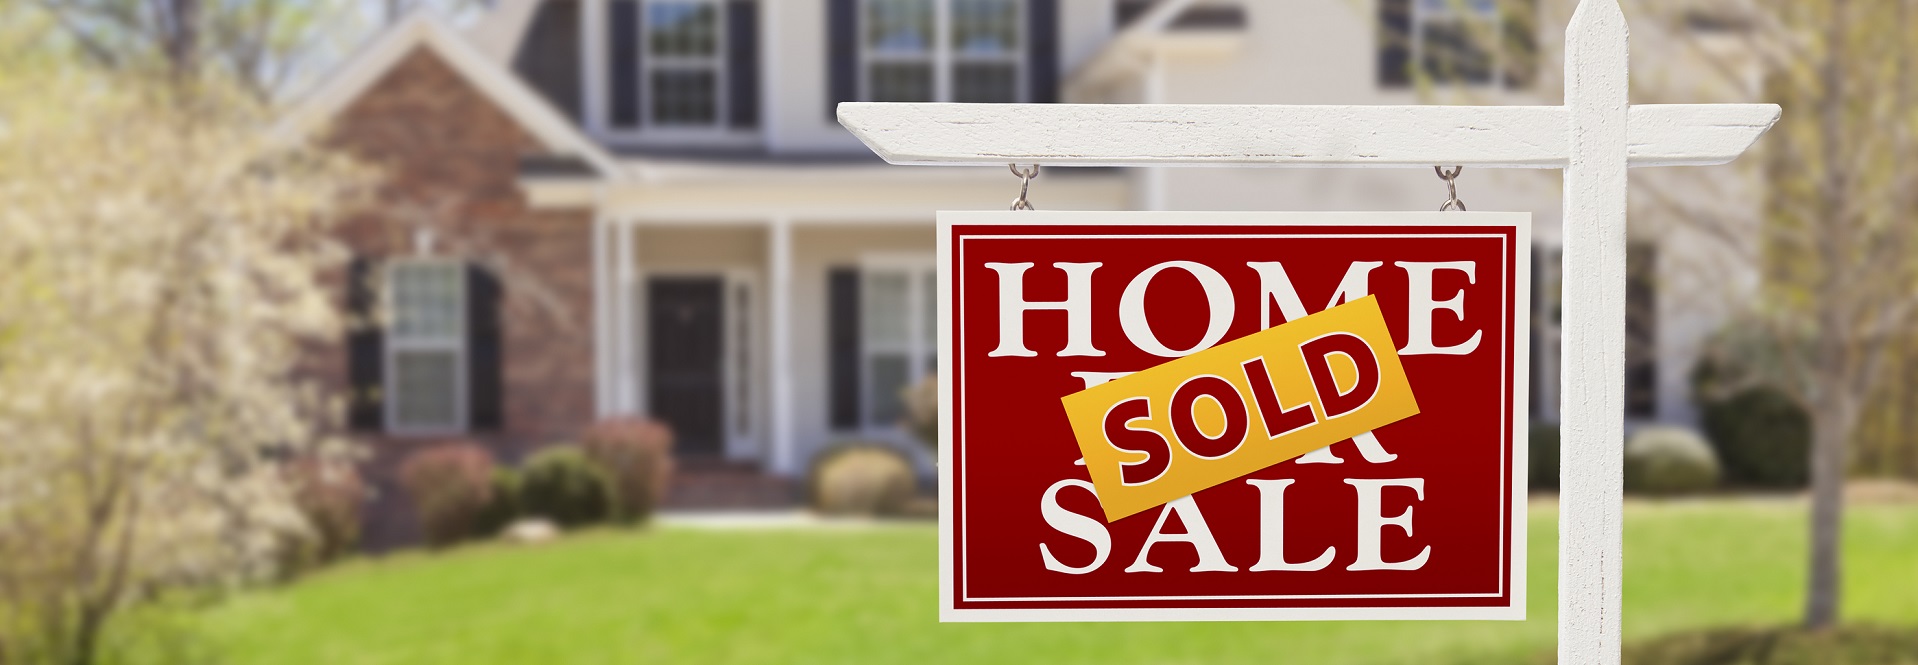 How to Become a Real Estate Agent in Virginia
